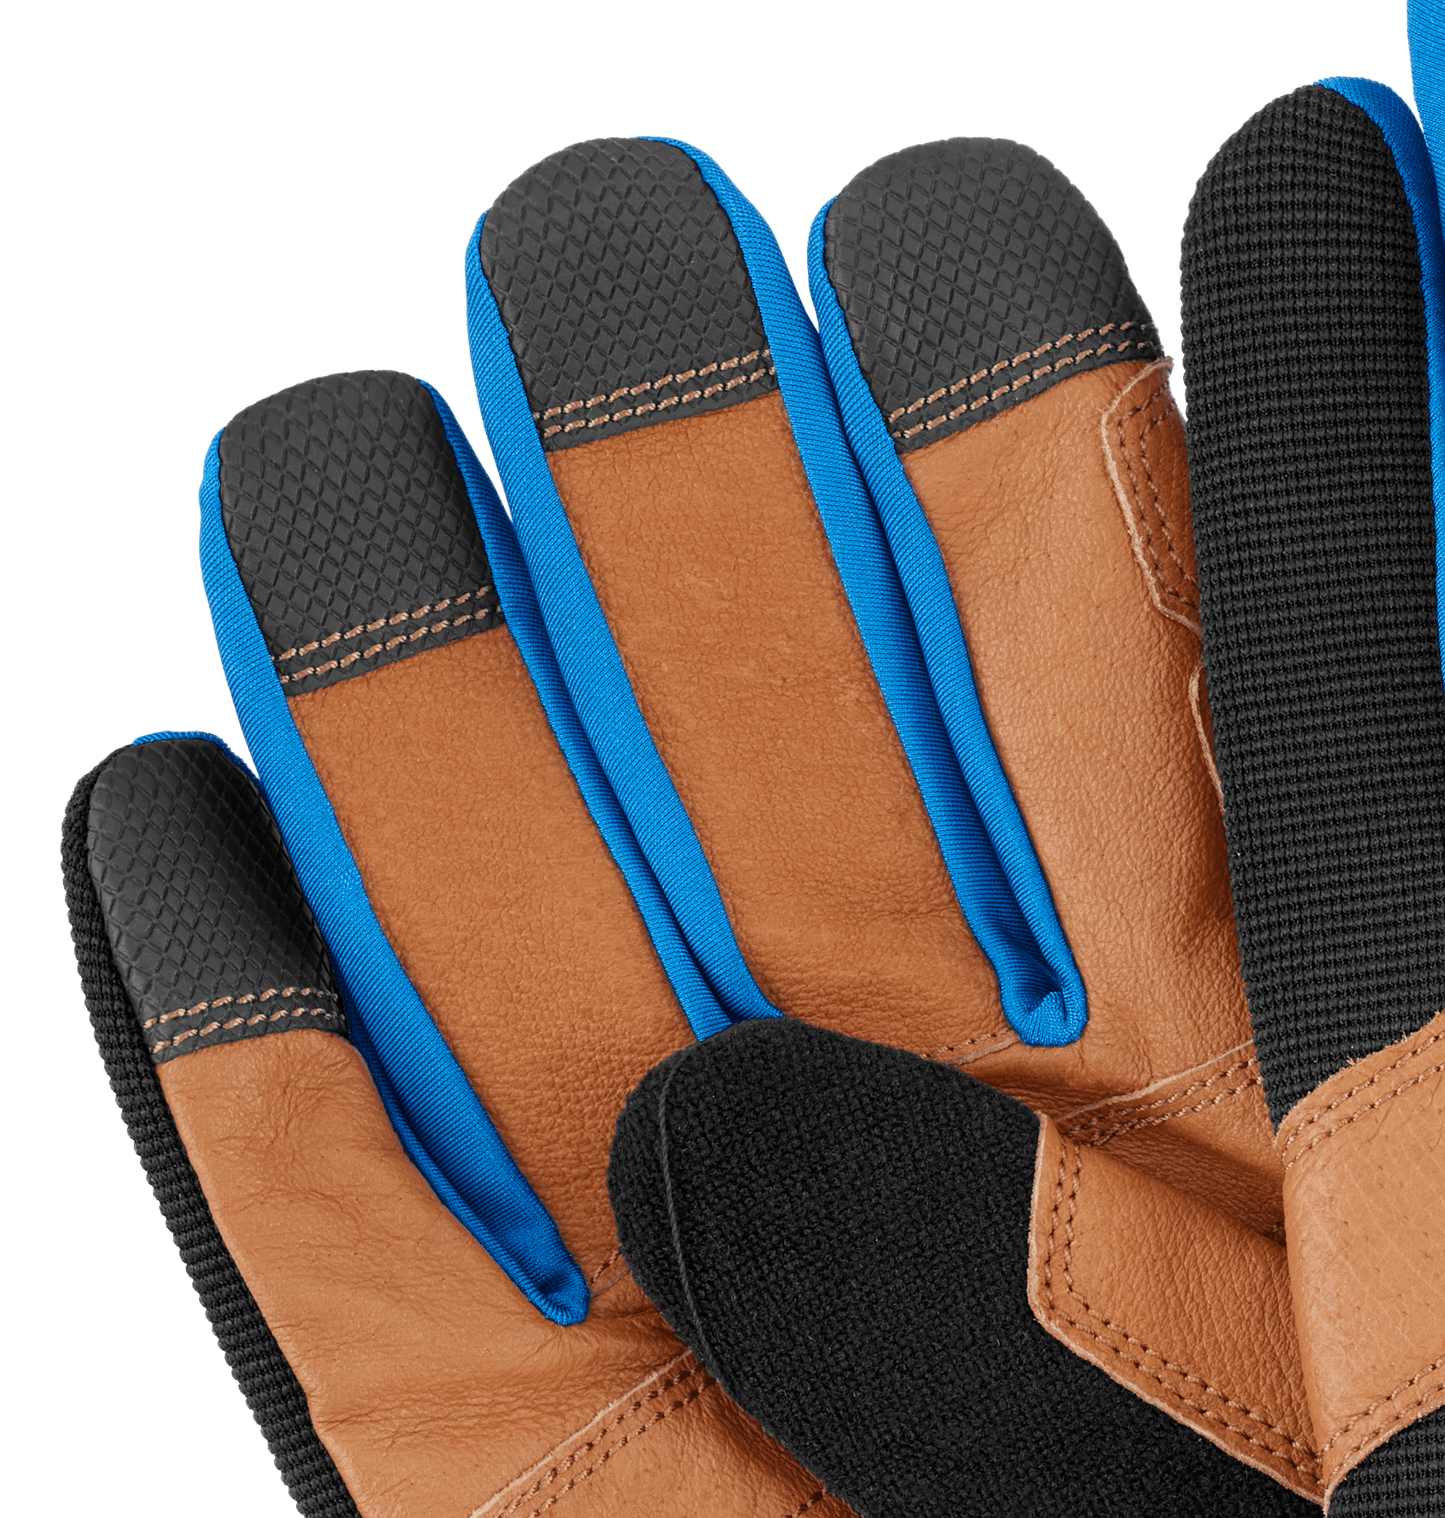 Leather Palm Gloves - Large